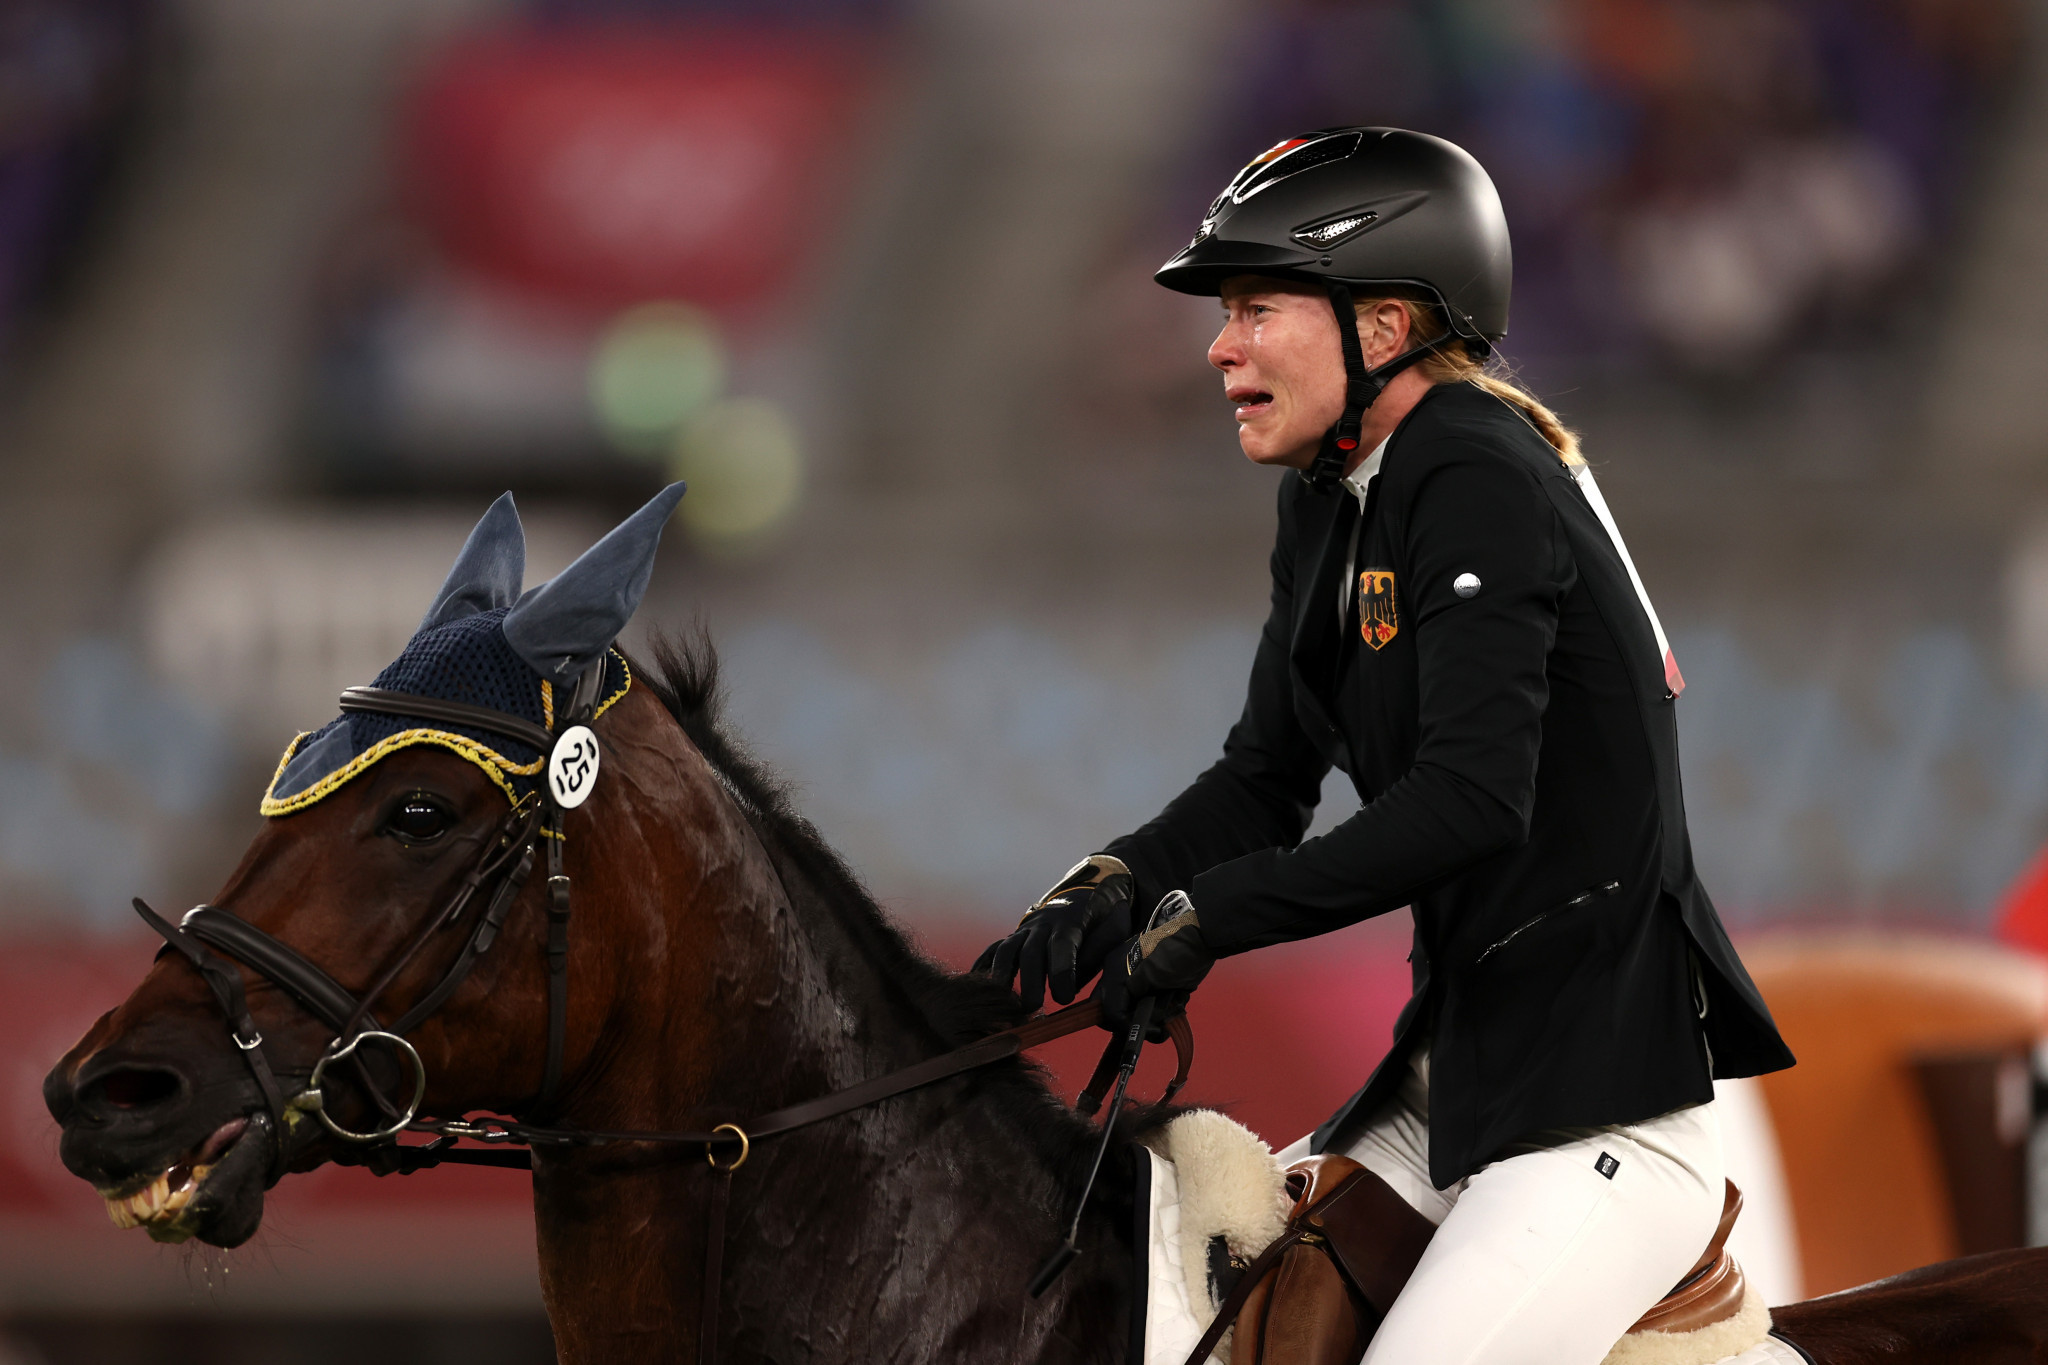 The UIPM's riding controversy stemmed from Saint-Boy's refusal to jump for women's competition leader Annika Schleu at the Tokyo 2020 Olympics ©Getty Images